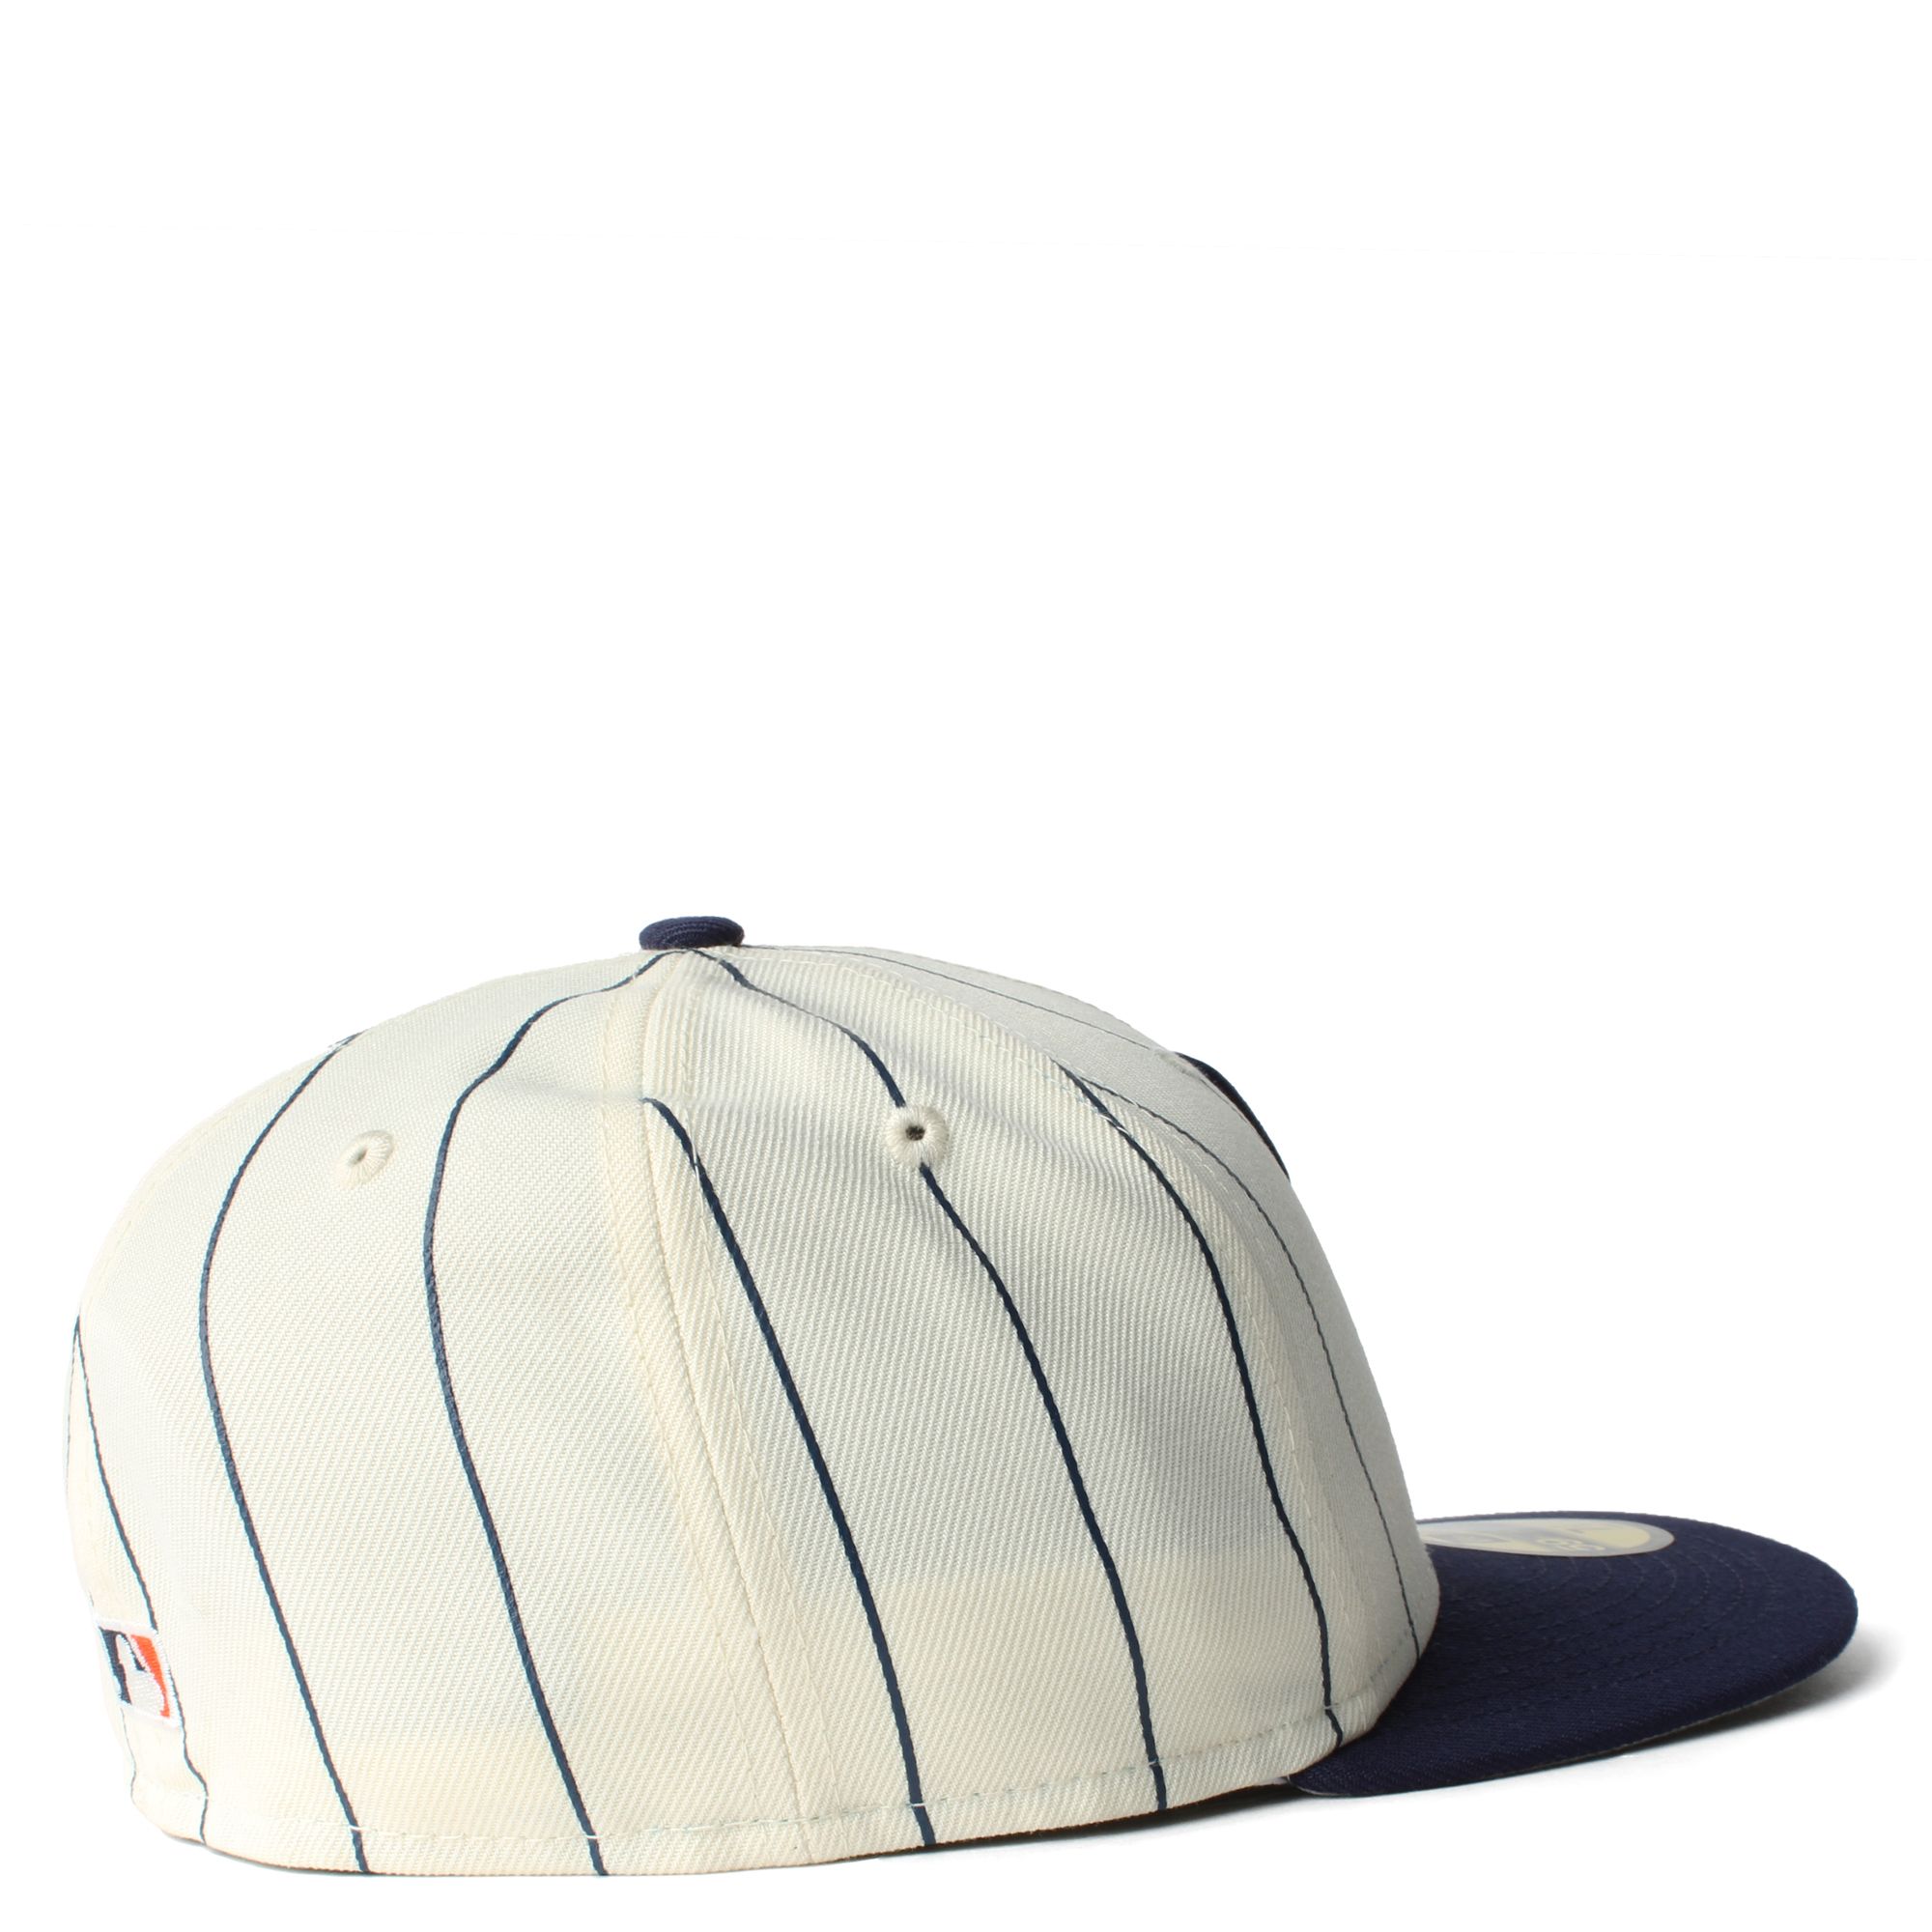 New York Yankees PINSTRIPE Brown-White Fitted Hat by New Era